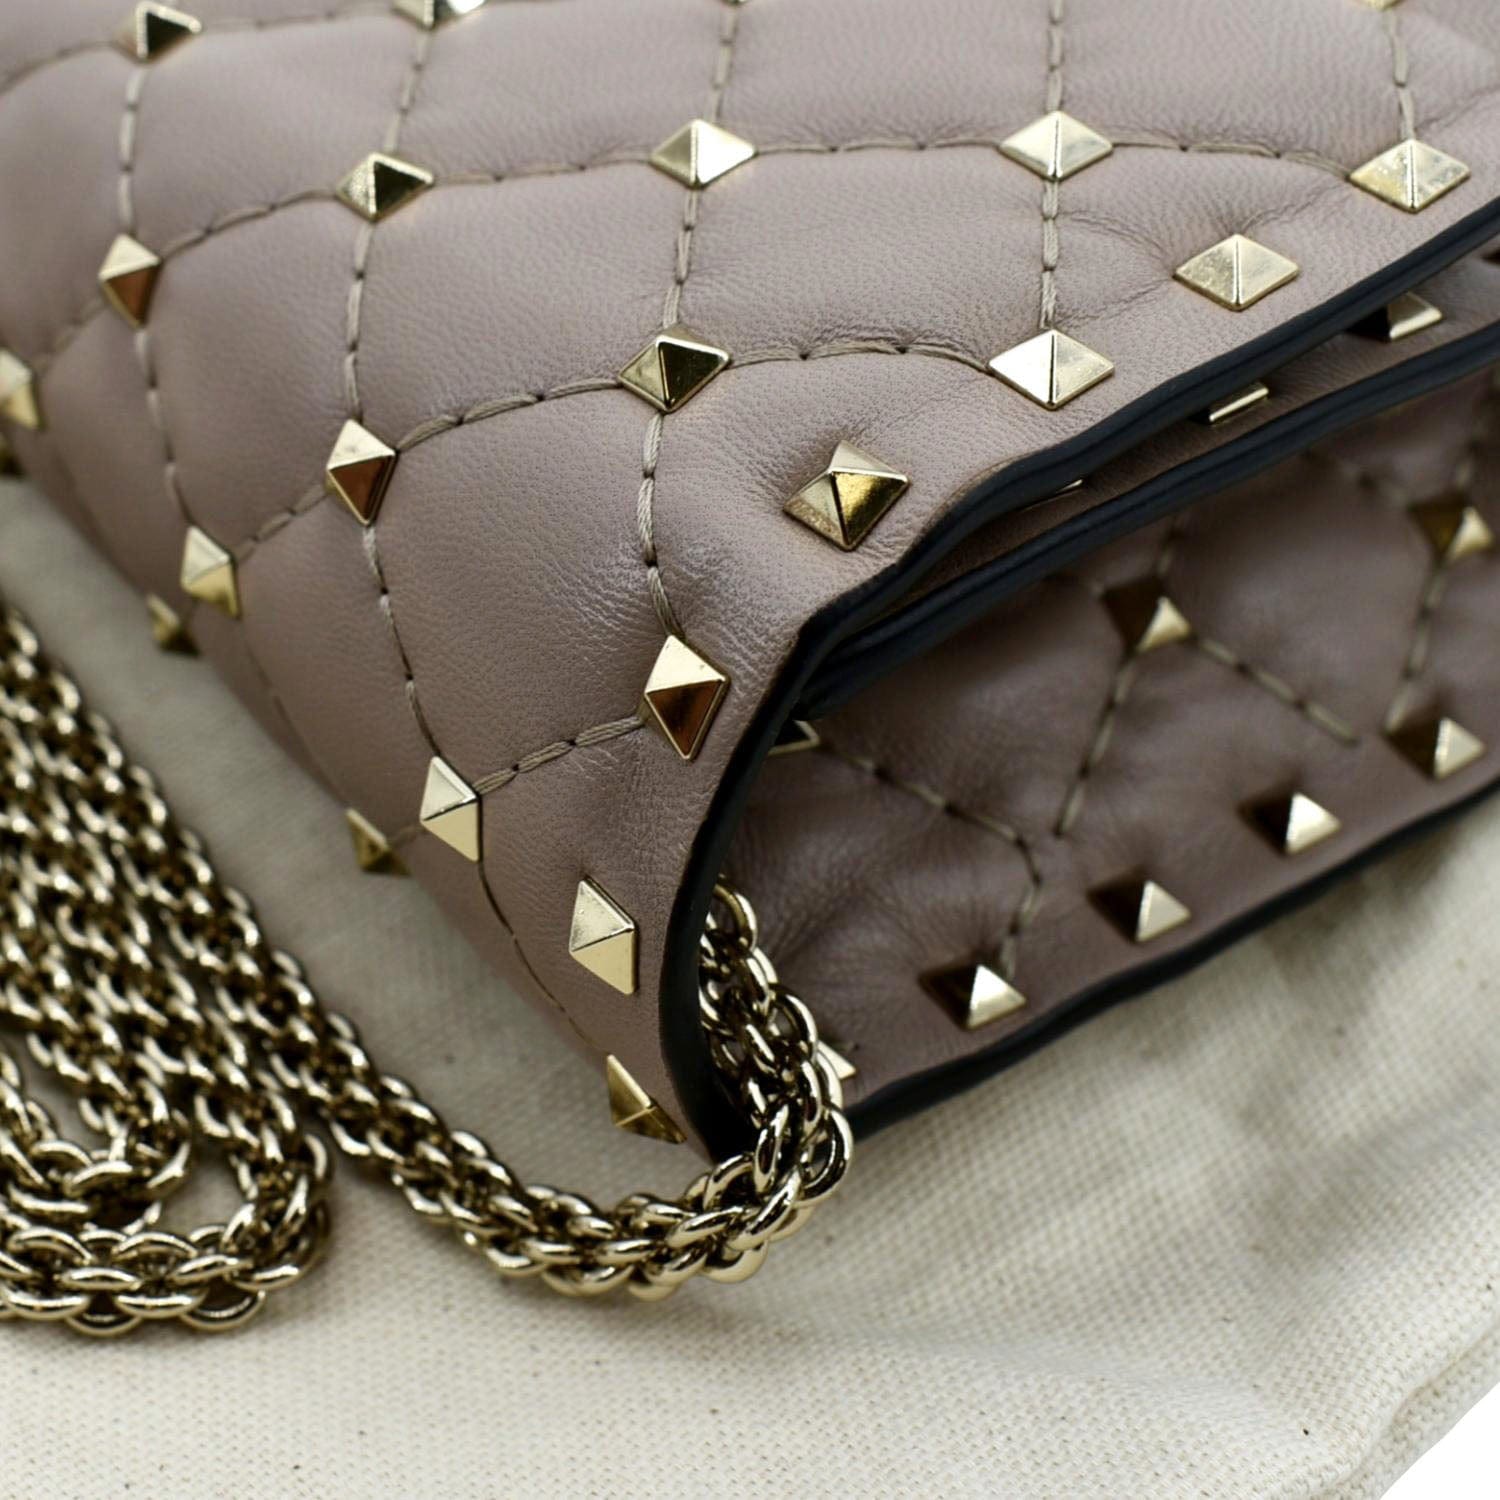 VALENTINO Rockstud Spike Quilted Leather Top Handle Crossbody Bag Poud